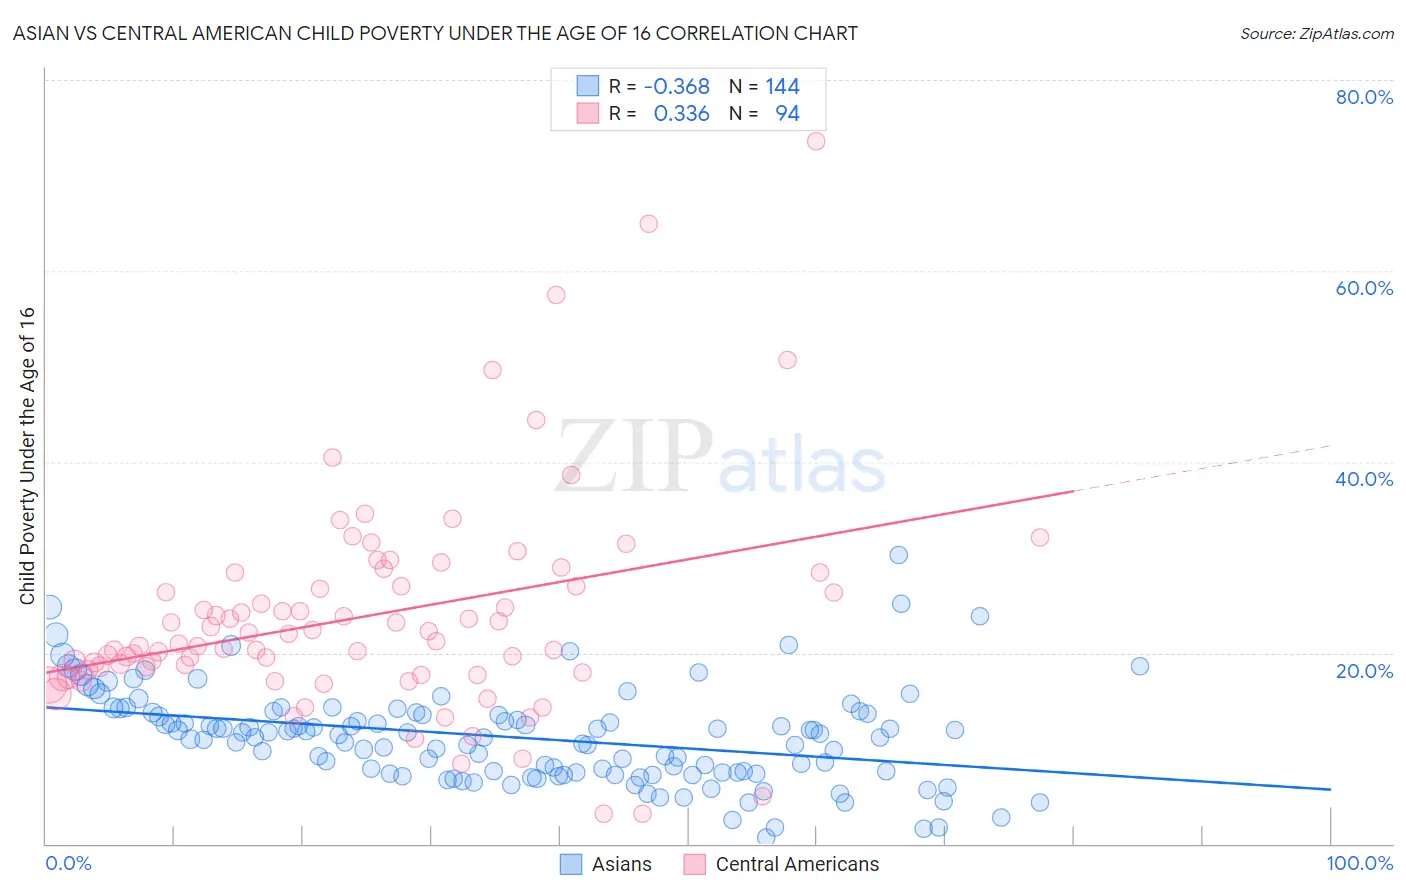 Asian vs Central American Child Poverty Under the Age of 16